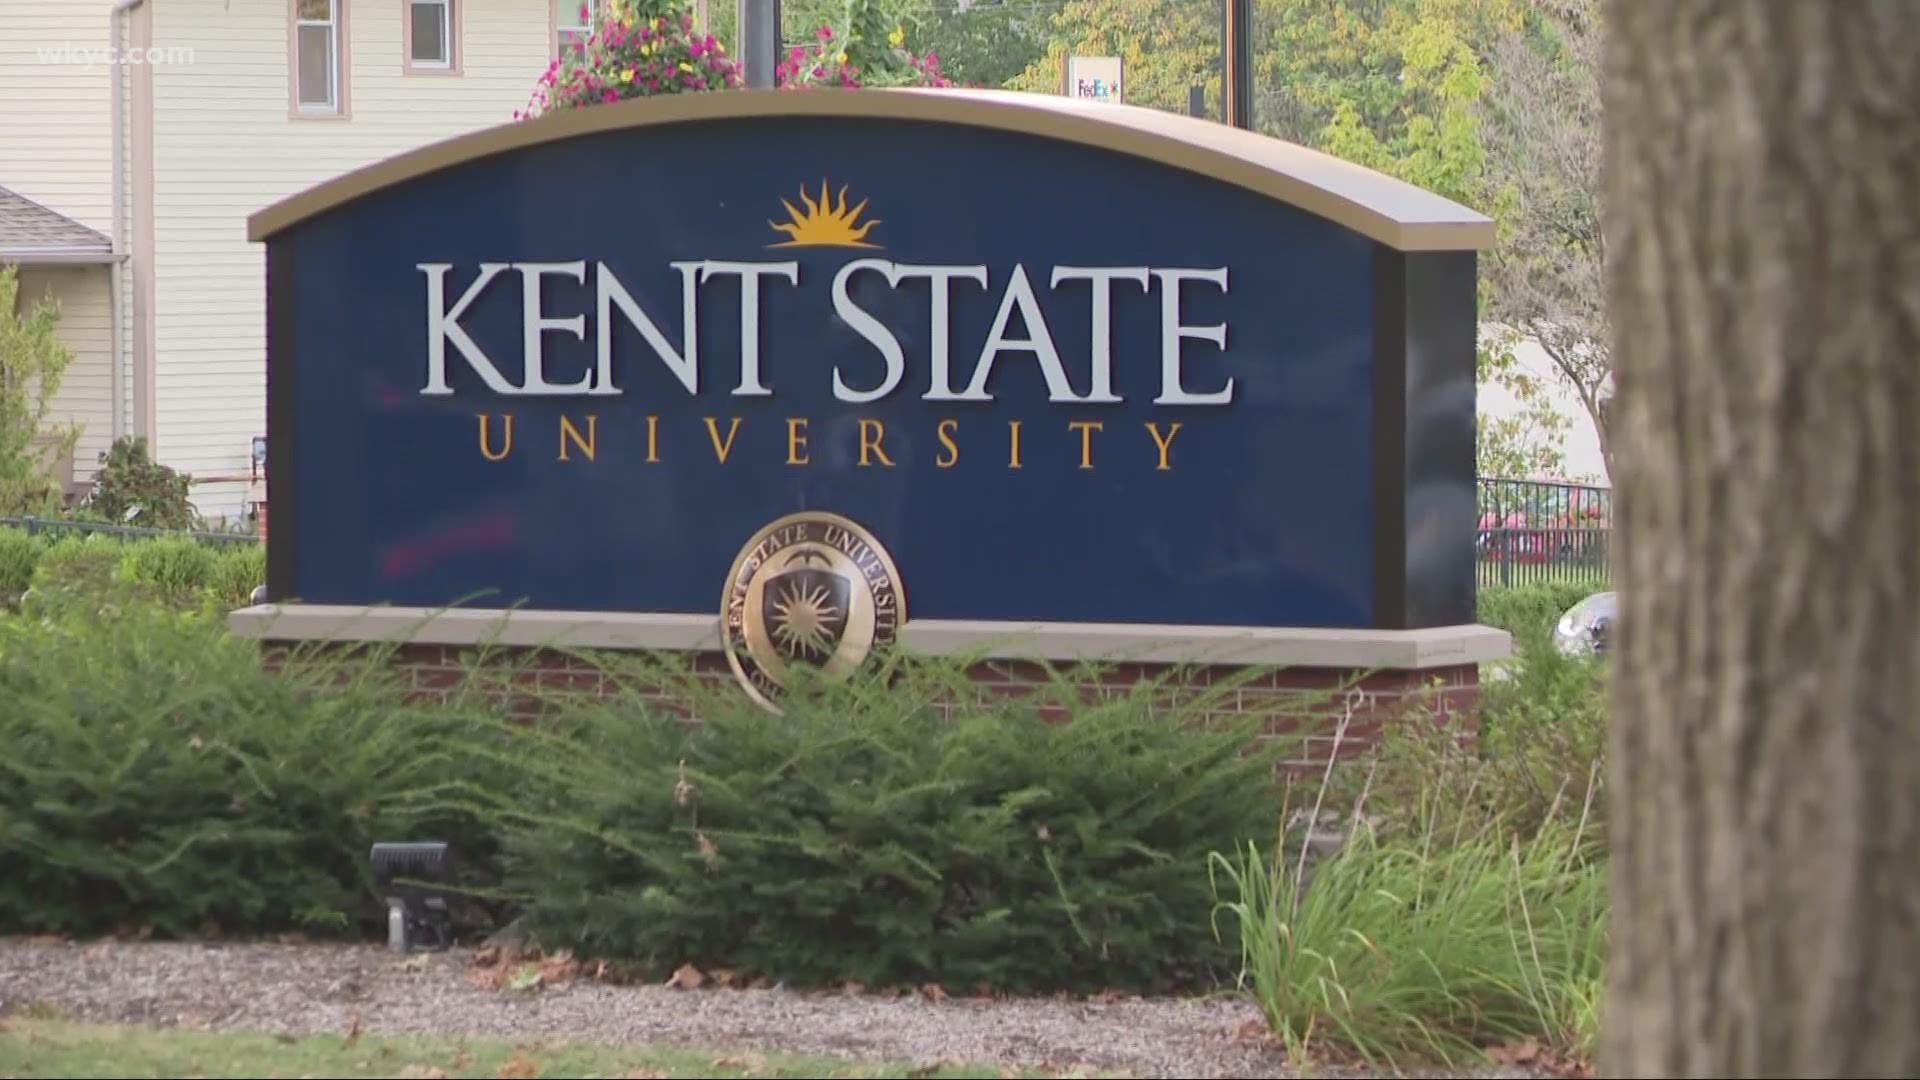 Halloween celebrations in college towns tend to draw huge crowds. Tiffany Tarpley reports on how the city of Kent is preparing for this weekend.